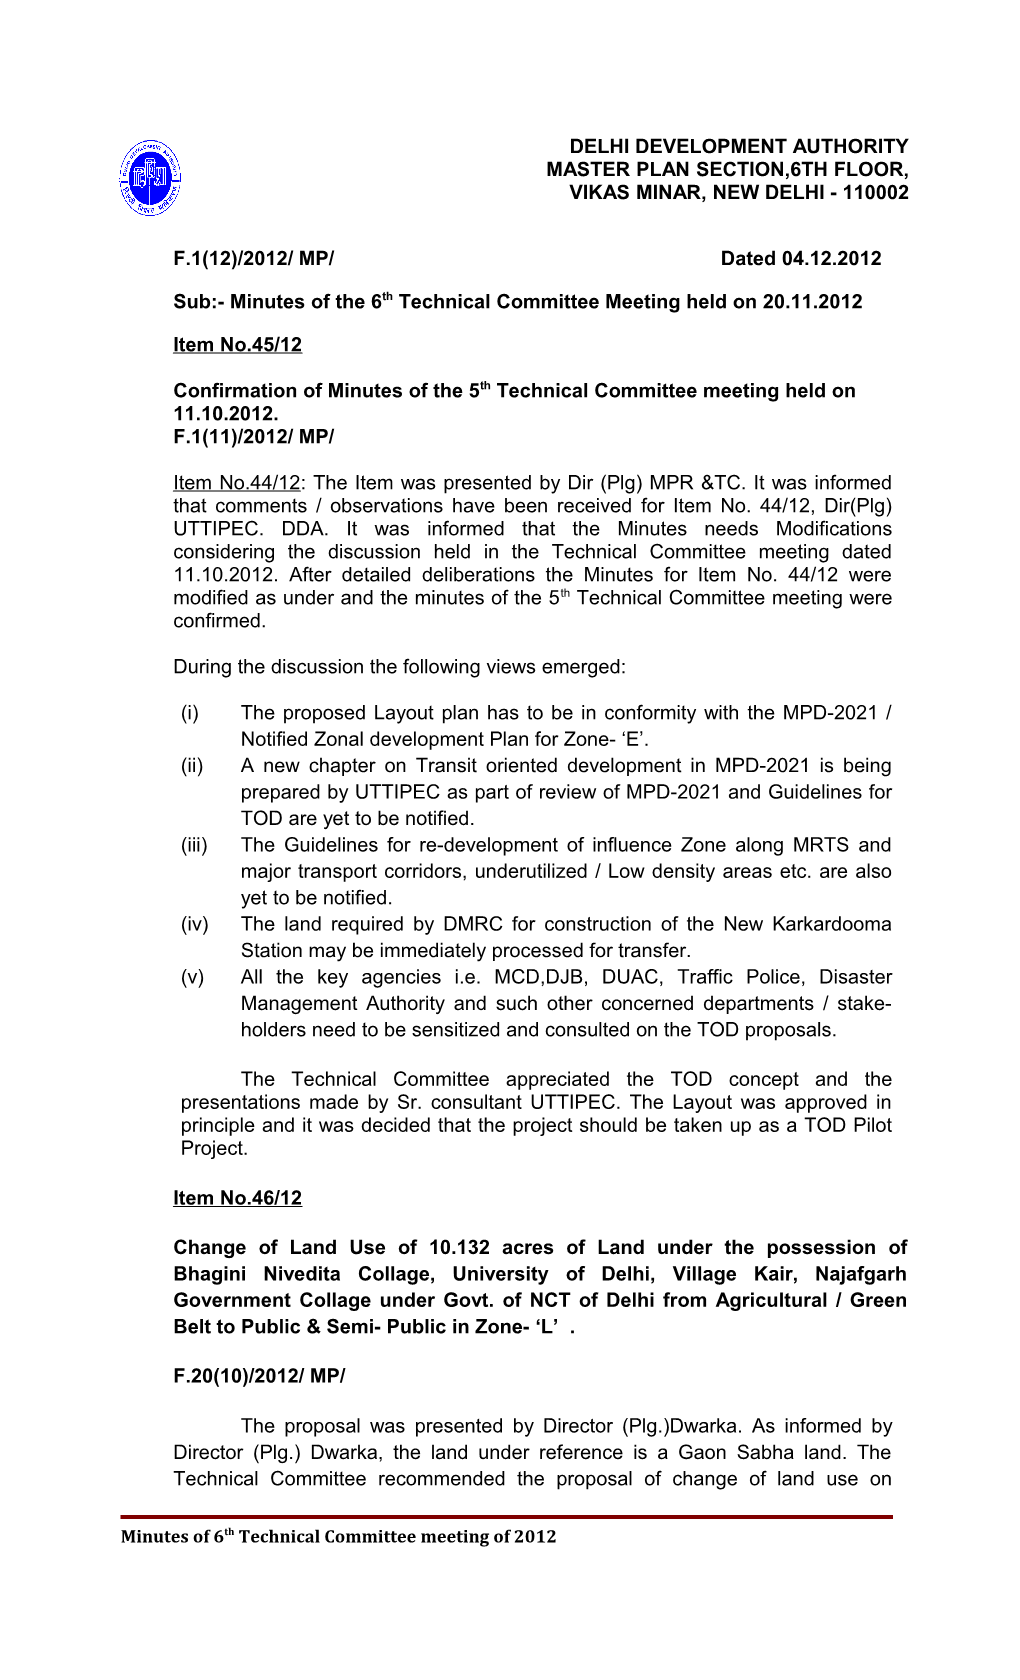 Sub:- Minutes of the 6Thtechnical Committee Meeting Held on 20.11.2012